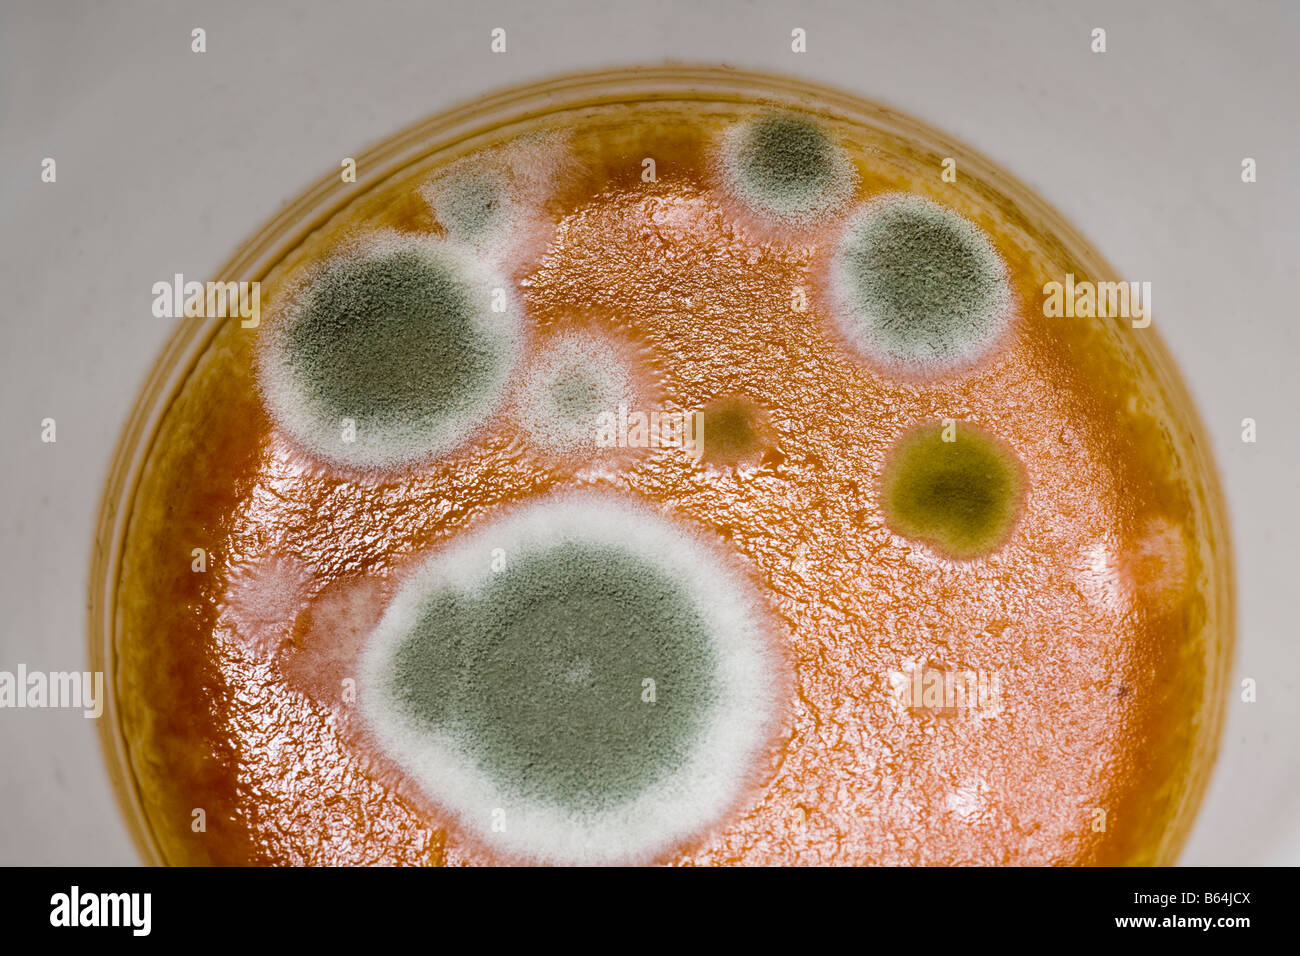 Penicillin mould growing in an unwashed coffee cup Stock Photo